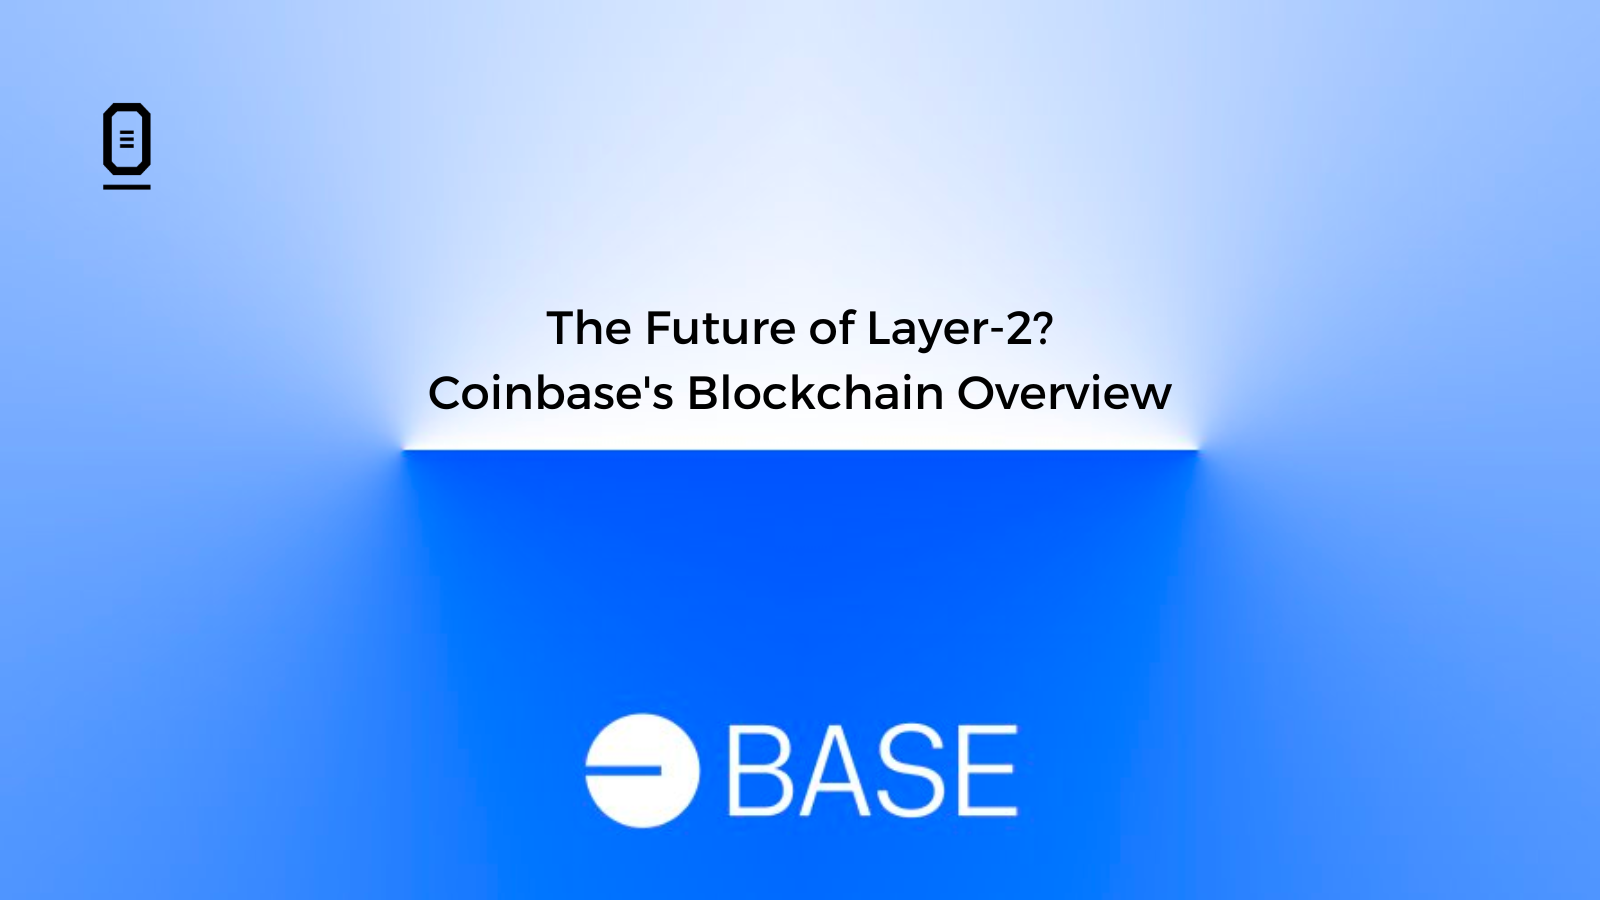 Is Base The Future of Layer 2?